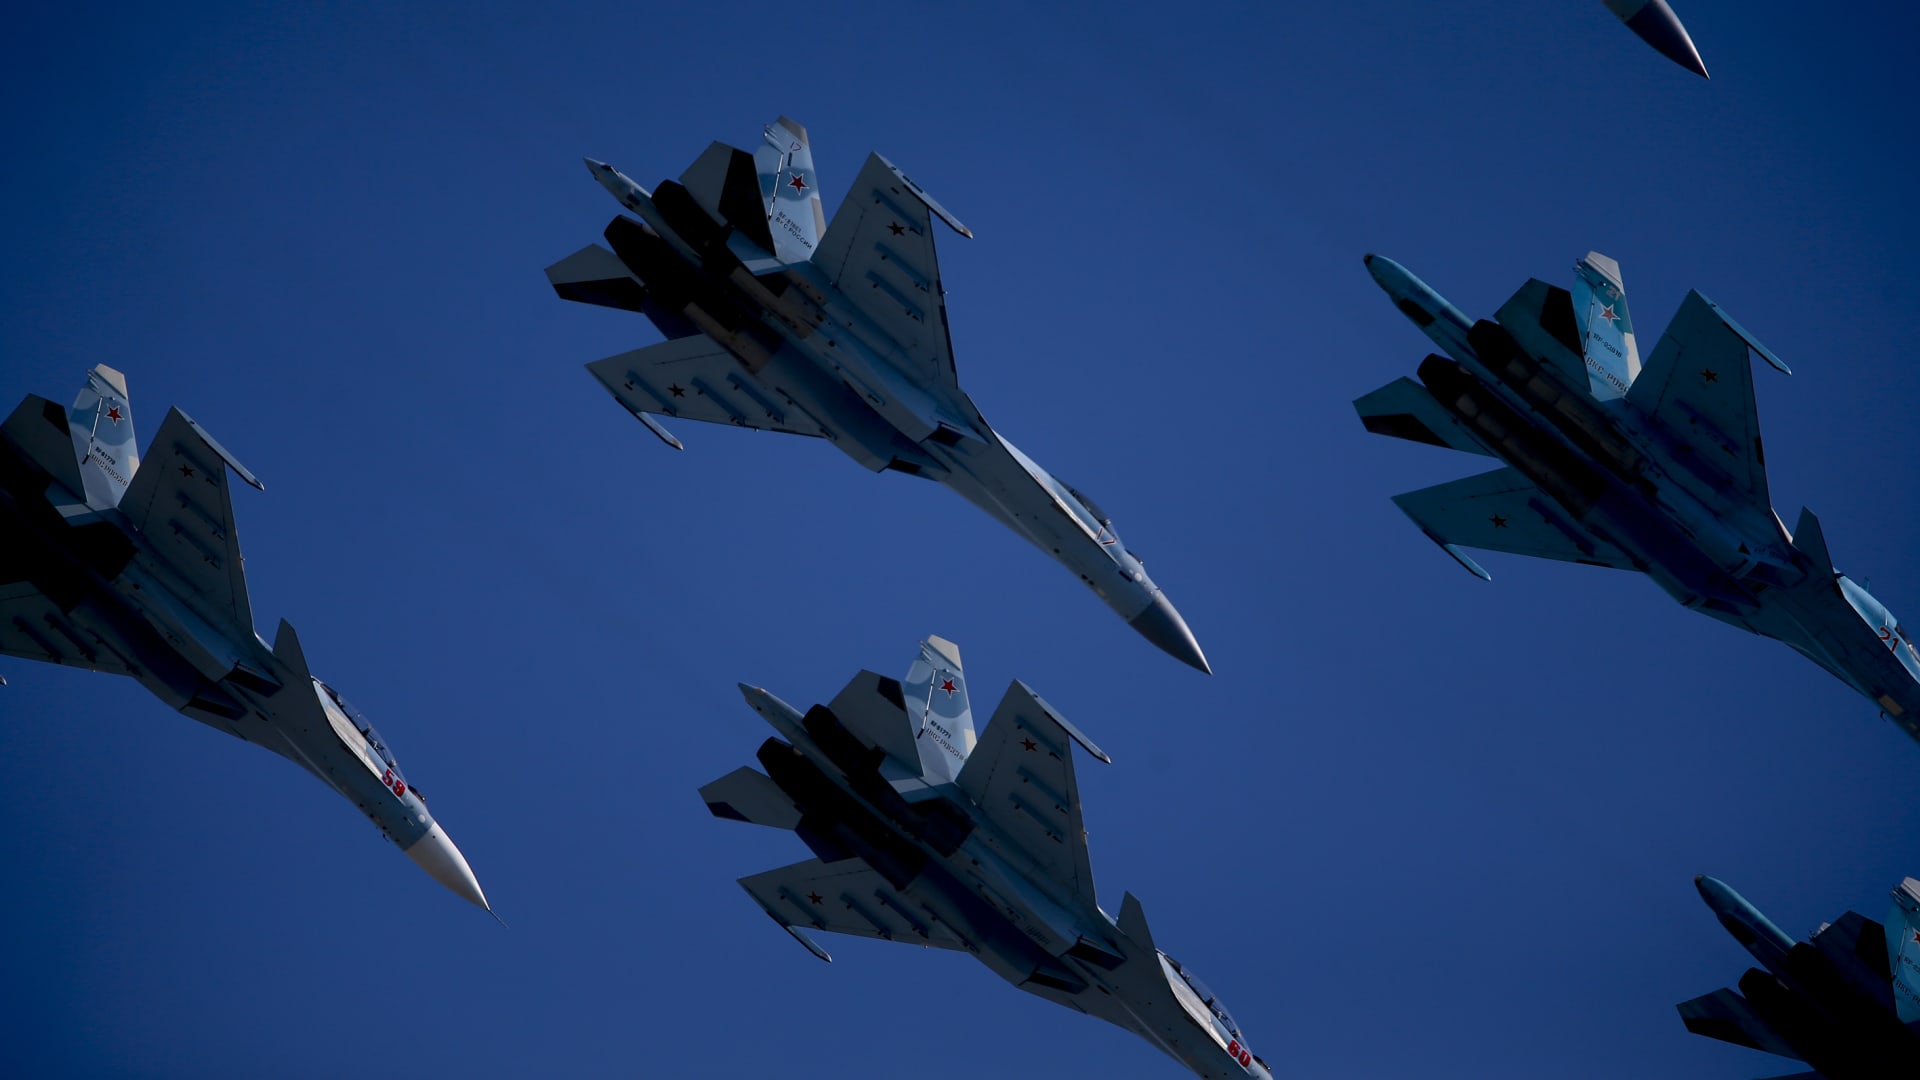 Russian Sukhoi Su-34, Sukhoi Su-35S and Sukhoi Su-30S fighter jets perform ahead of Victory Day in Red Square in Moscow.